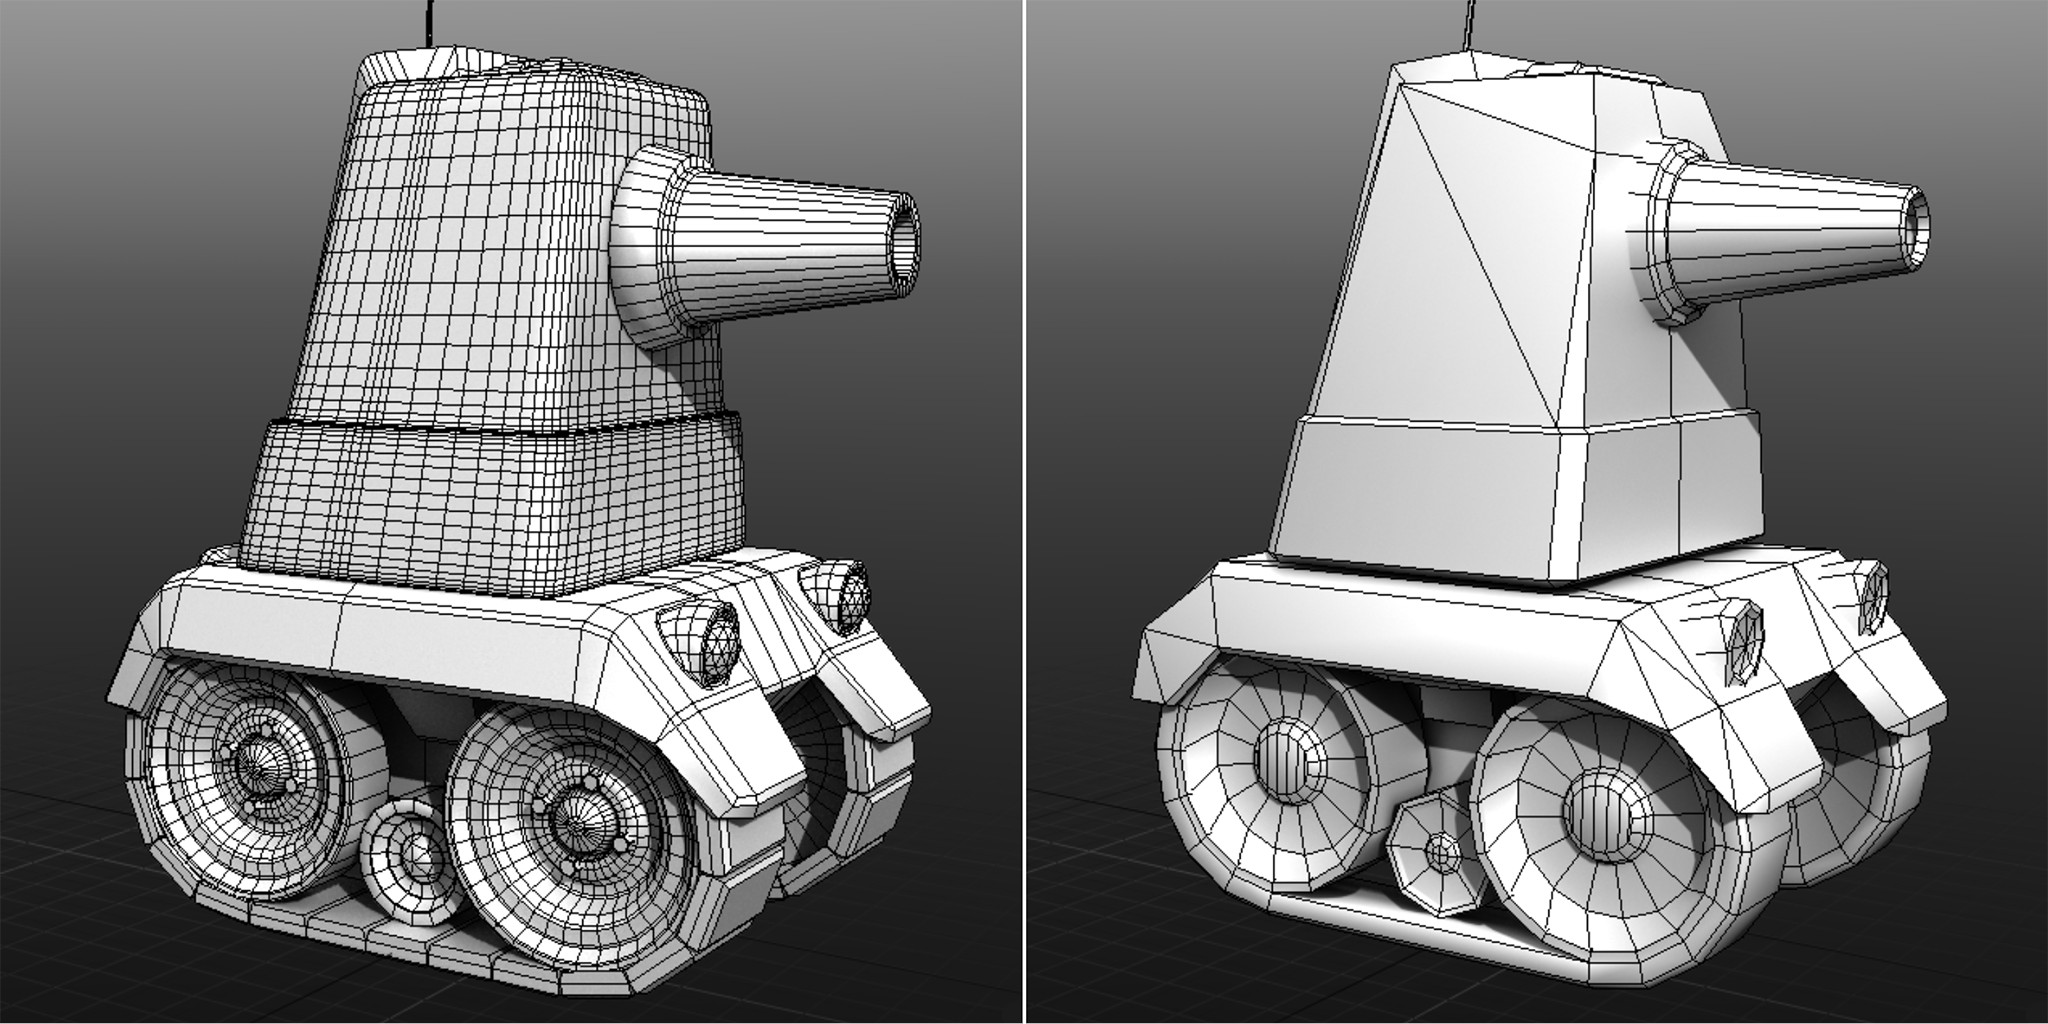 The original model for the tank was nearly 50,000 tris when it was given to me. I reduced it to fewer than 3,000.

Mesh optimized in Modo.